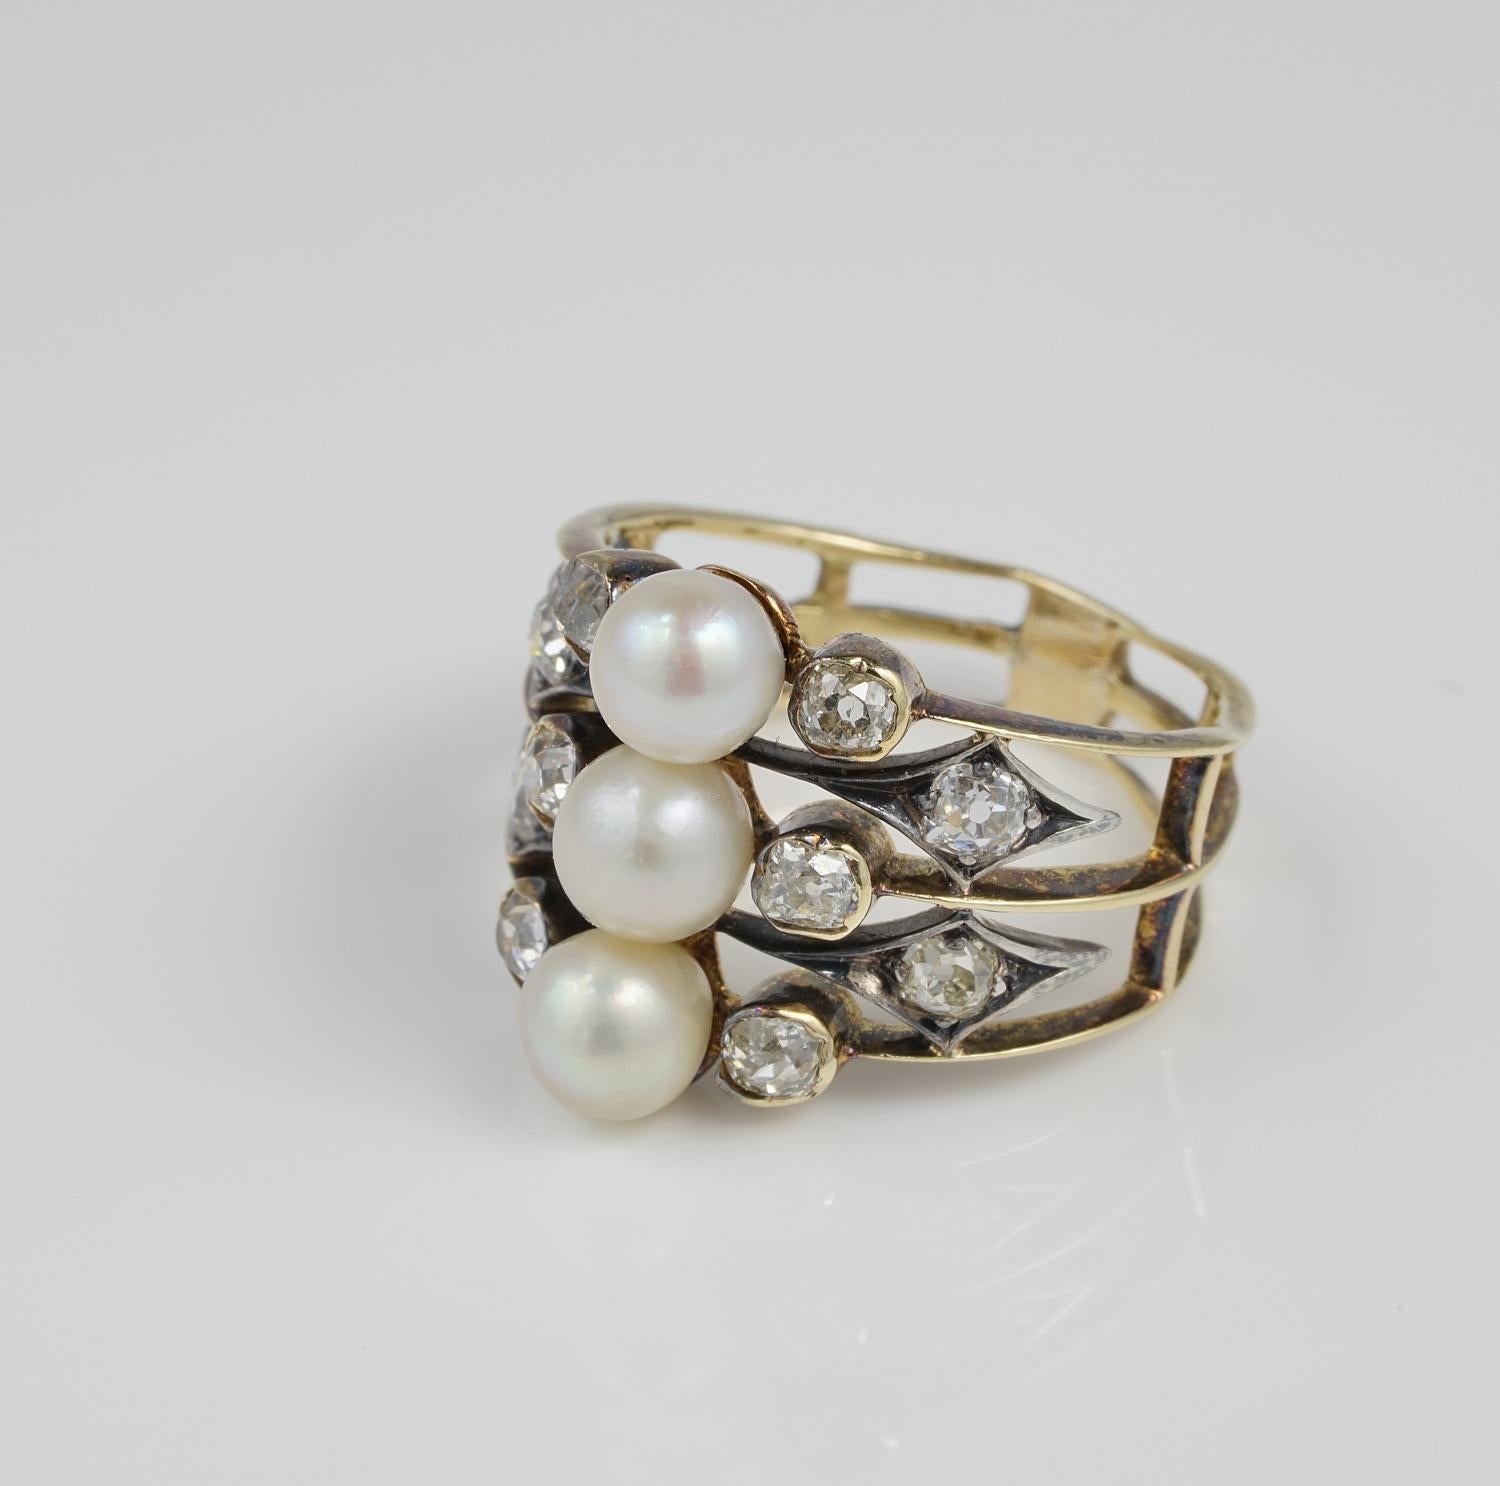 Distinctive Victorian 1.0 Carat Old Mine Diamond Natural Pearl Trilogy Rare Ring For Sale 1